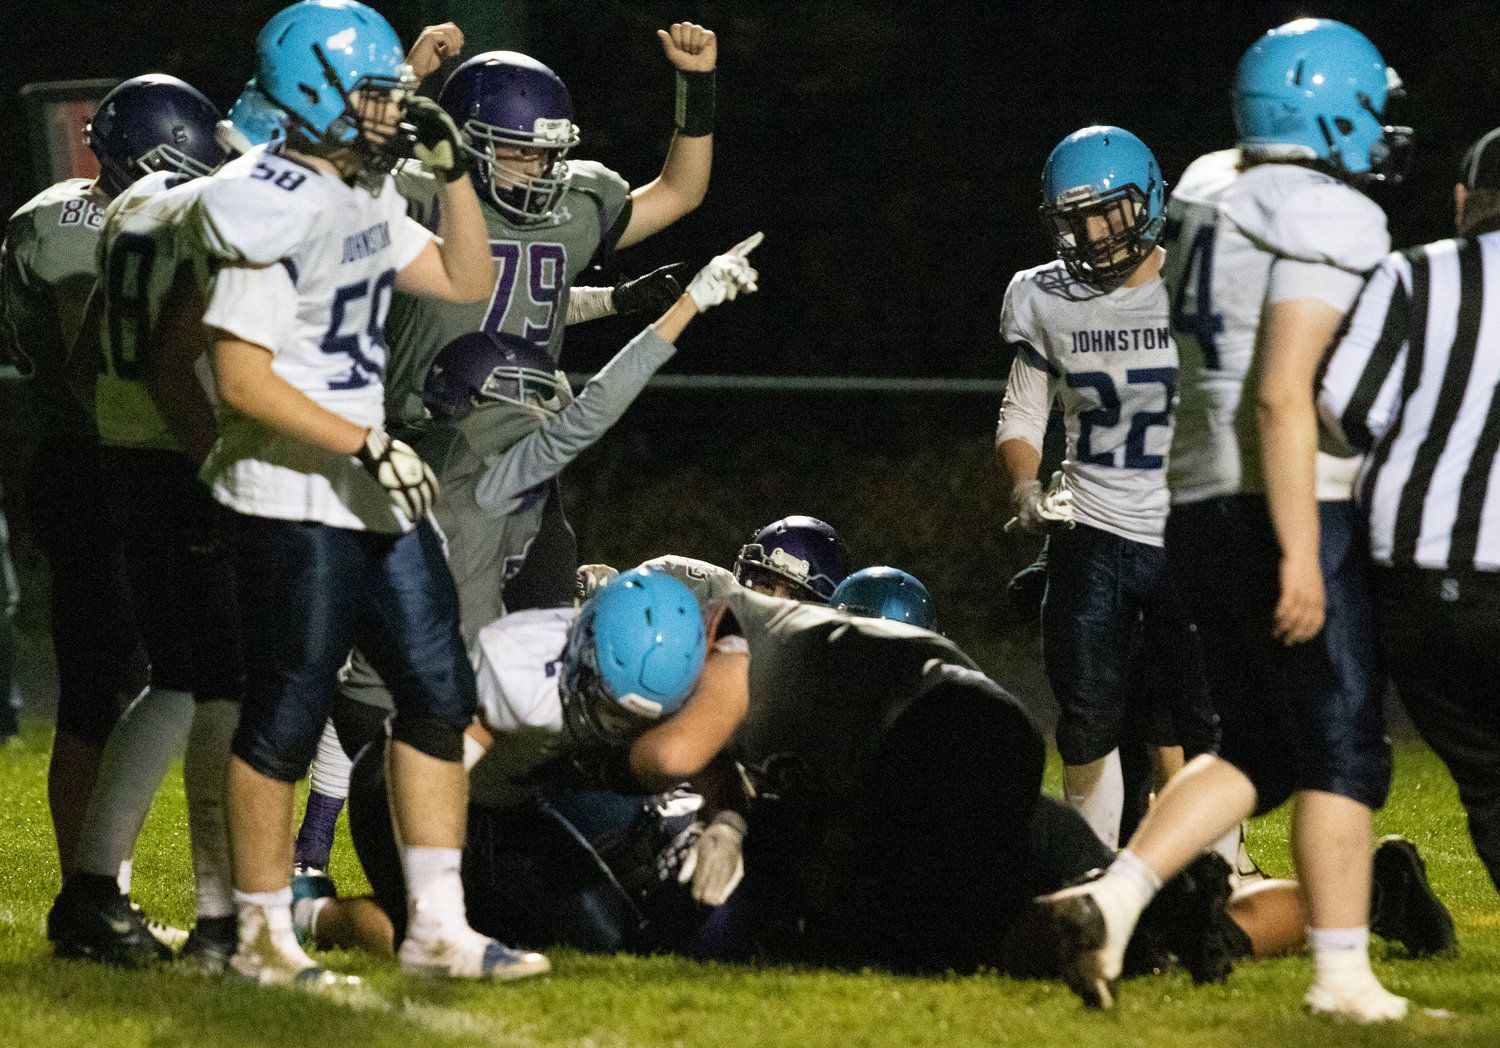 Huskies signal a fumble recovery by cornerback Ethan Martel as Johnston fumbled a snap in the third quarter.